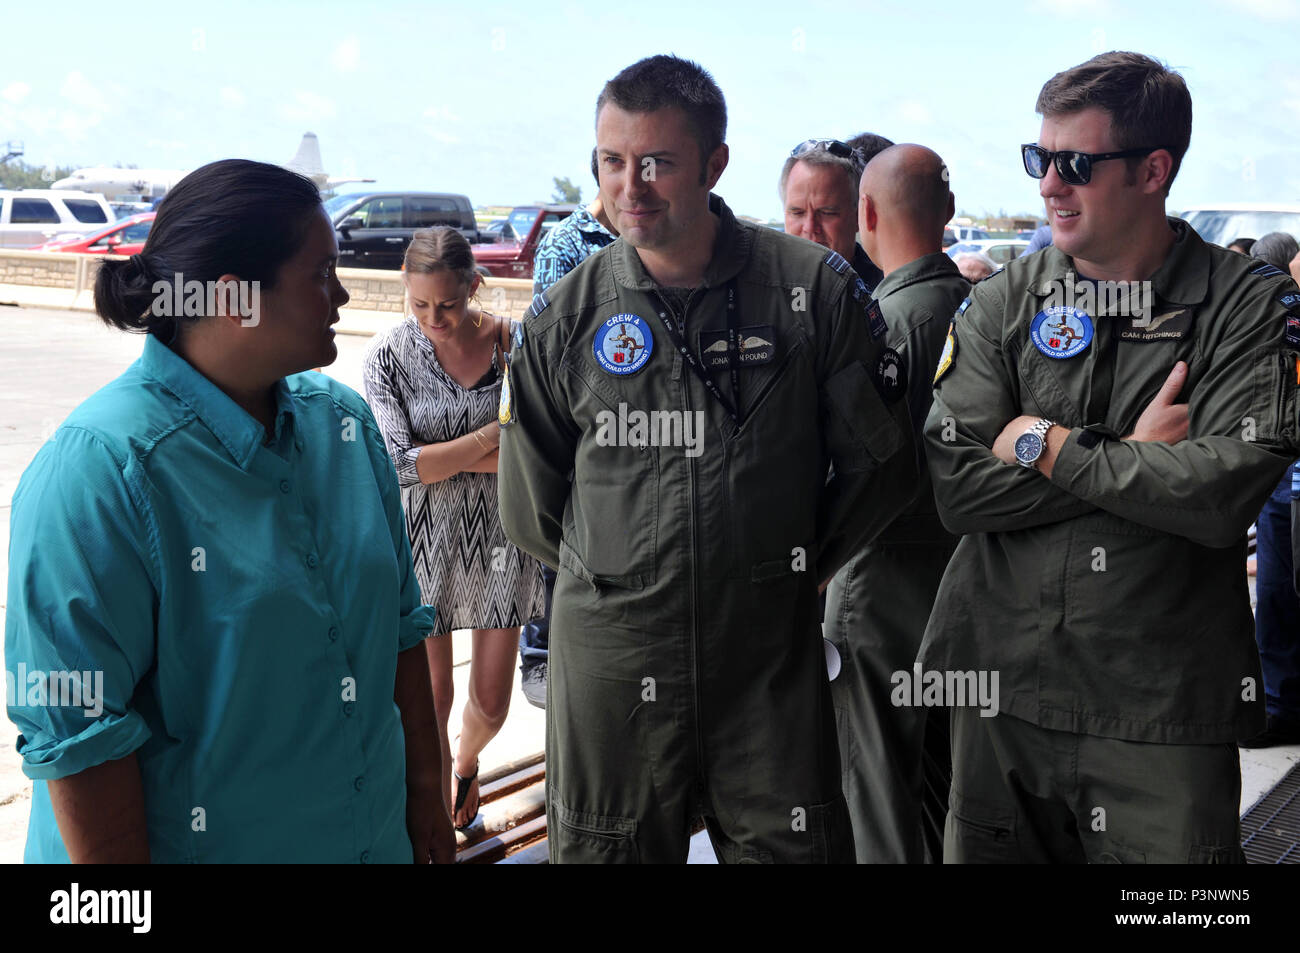 160720-N-ON468-163 MARINE CORPS BASE HAWAII (July 20, 2016) Sydnie Uemoto meets with service members from the Royal New Zealand Air Force No. 5 Air Squadron at Marine Corps Base Hawaii during Rim of the Pacific 2016. Sydnie and her friend David McMahon were involved in a small plane crash nine miles off the coast of the island of Kona, Hawaii July 15, and were rescued by a Coast Guard MH-65 Dolphin helicopter crew following an expansive joint search by U.S. Navy, Royal New Zealand Air Force, U.S. Air Force and Coast Guard crews after a 20-hour search. Twenty-six nations, more than 40 ships and Stock Photo